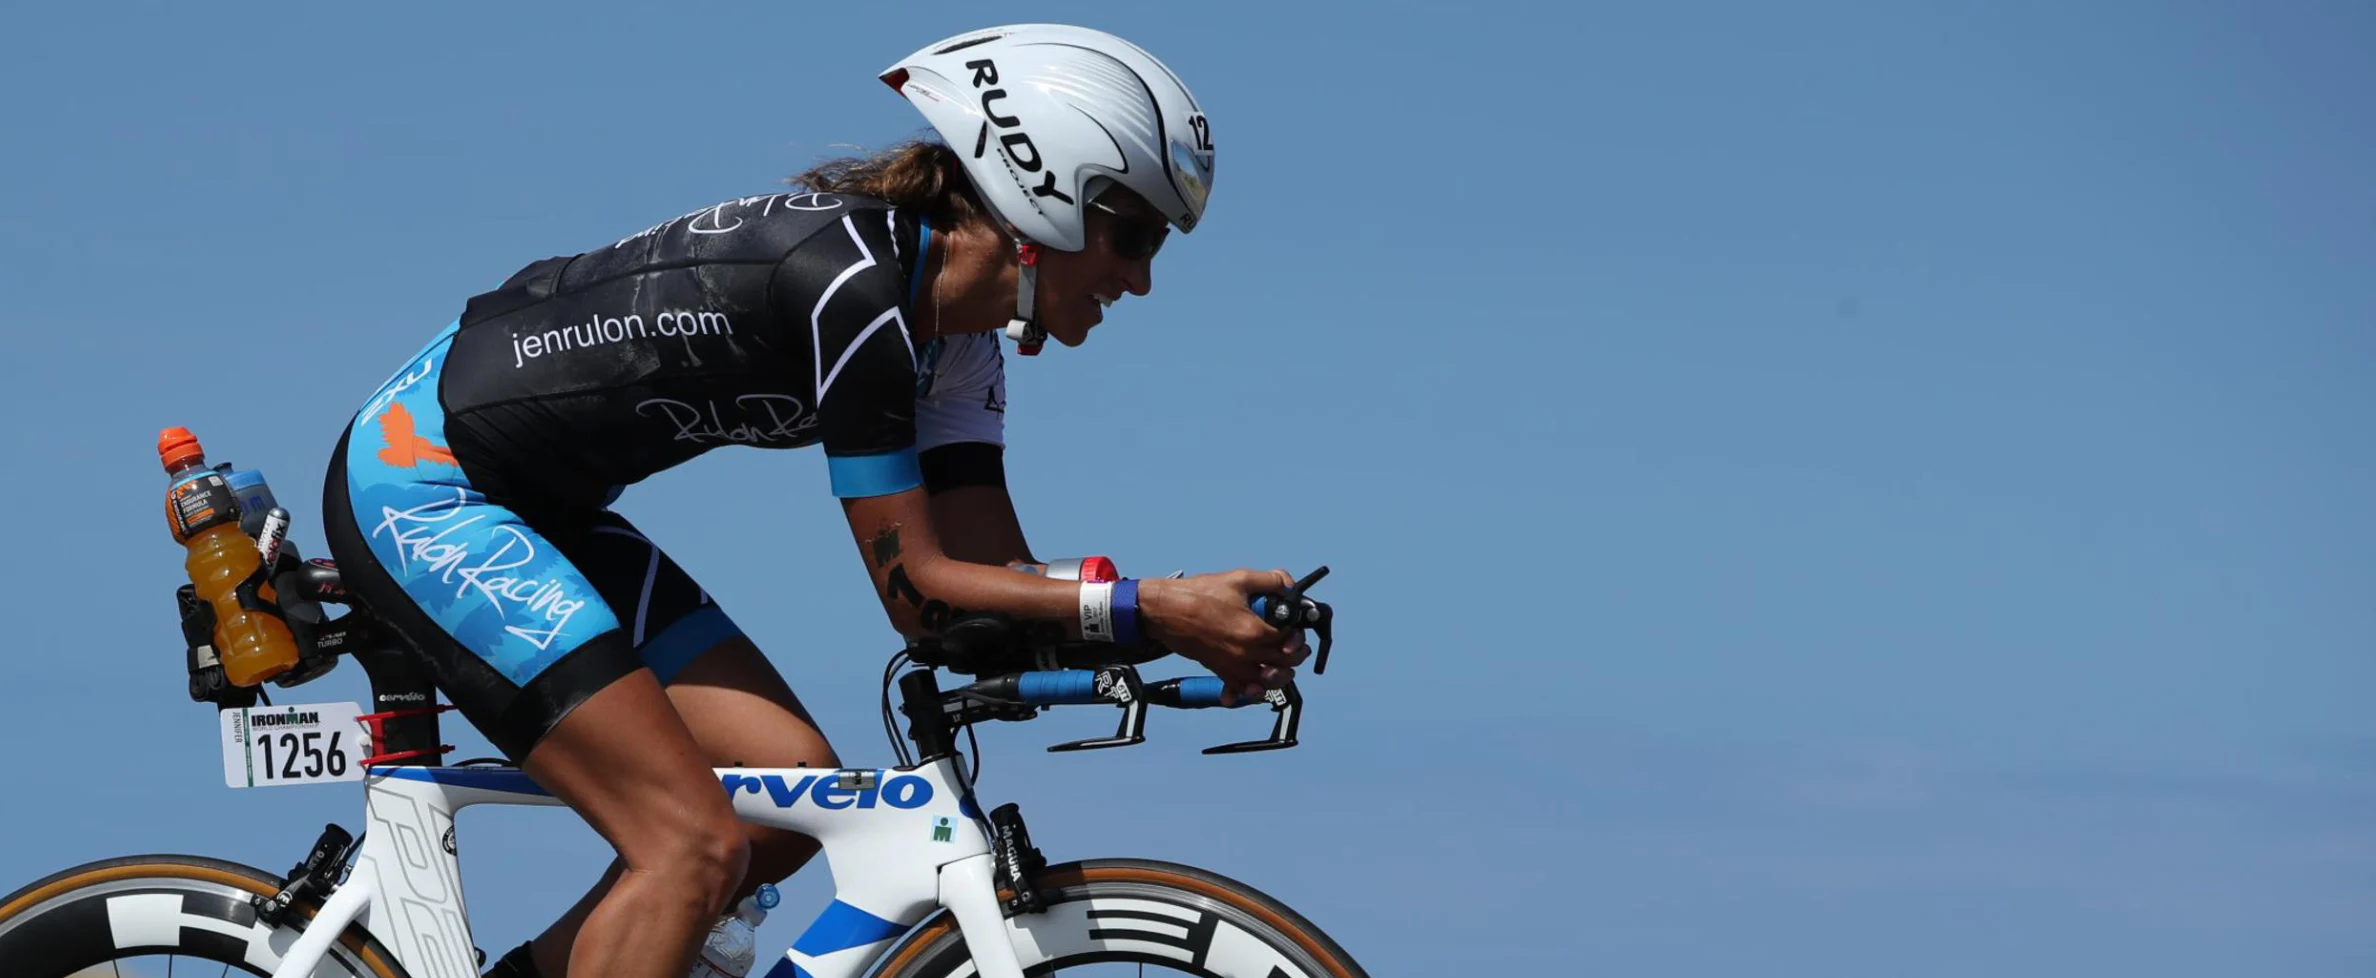 Heart Rate Monitors For Triathletes: Data at the Ironman